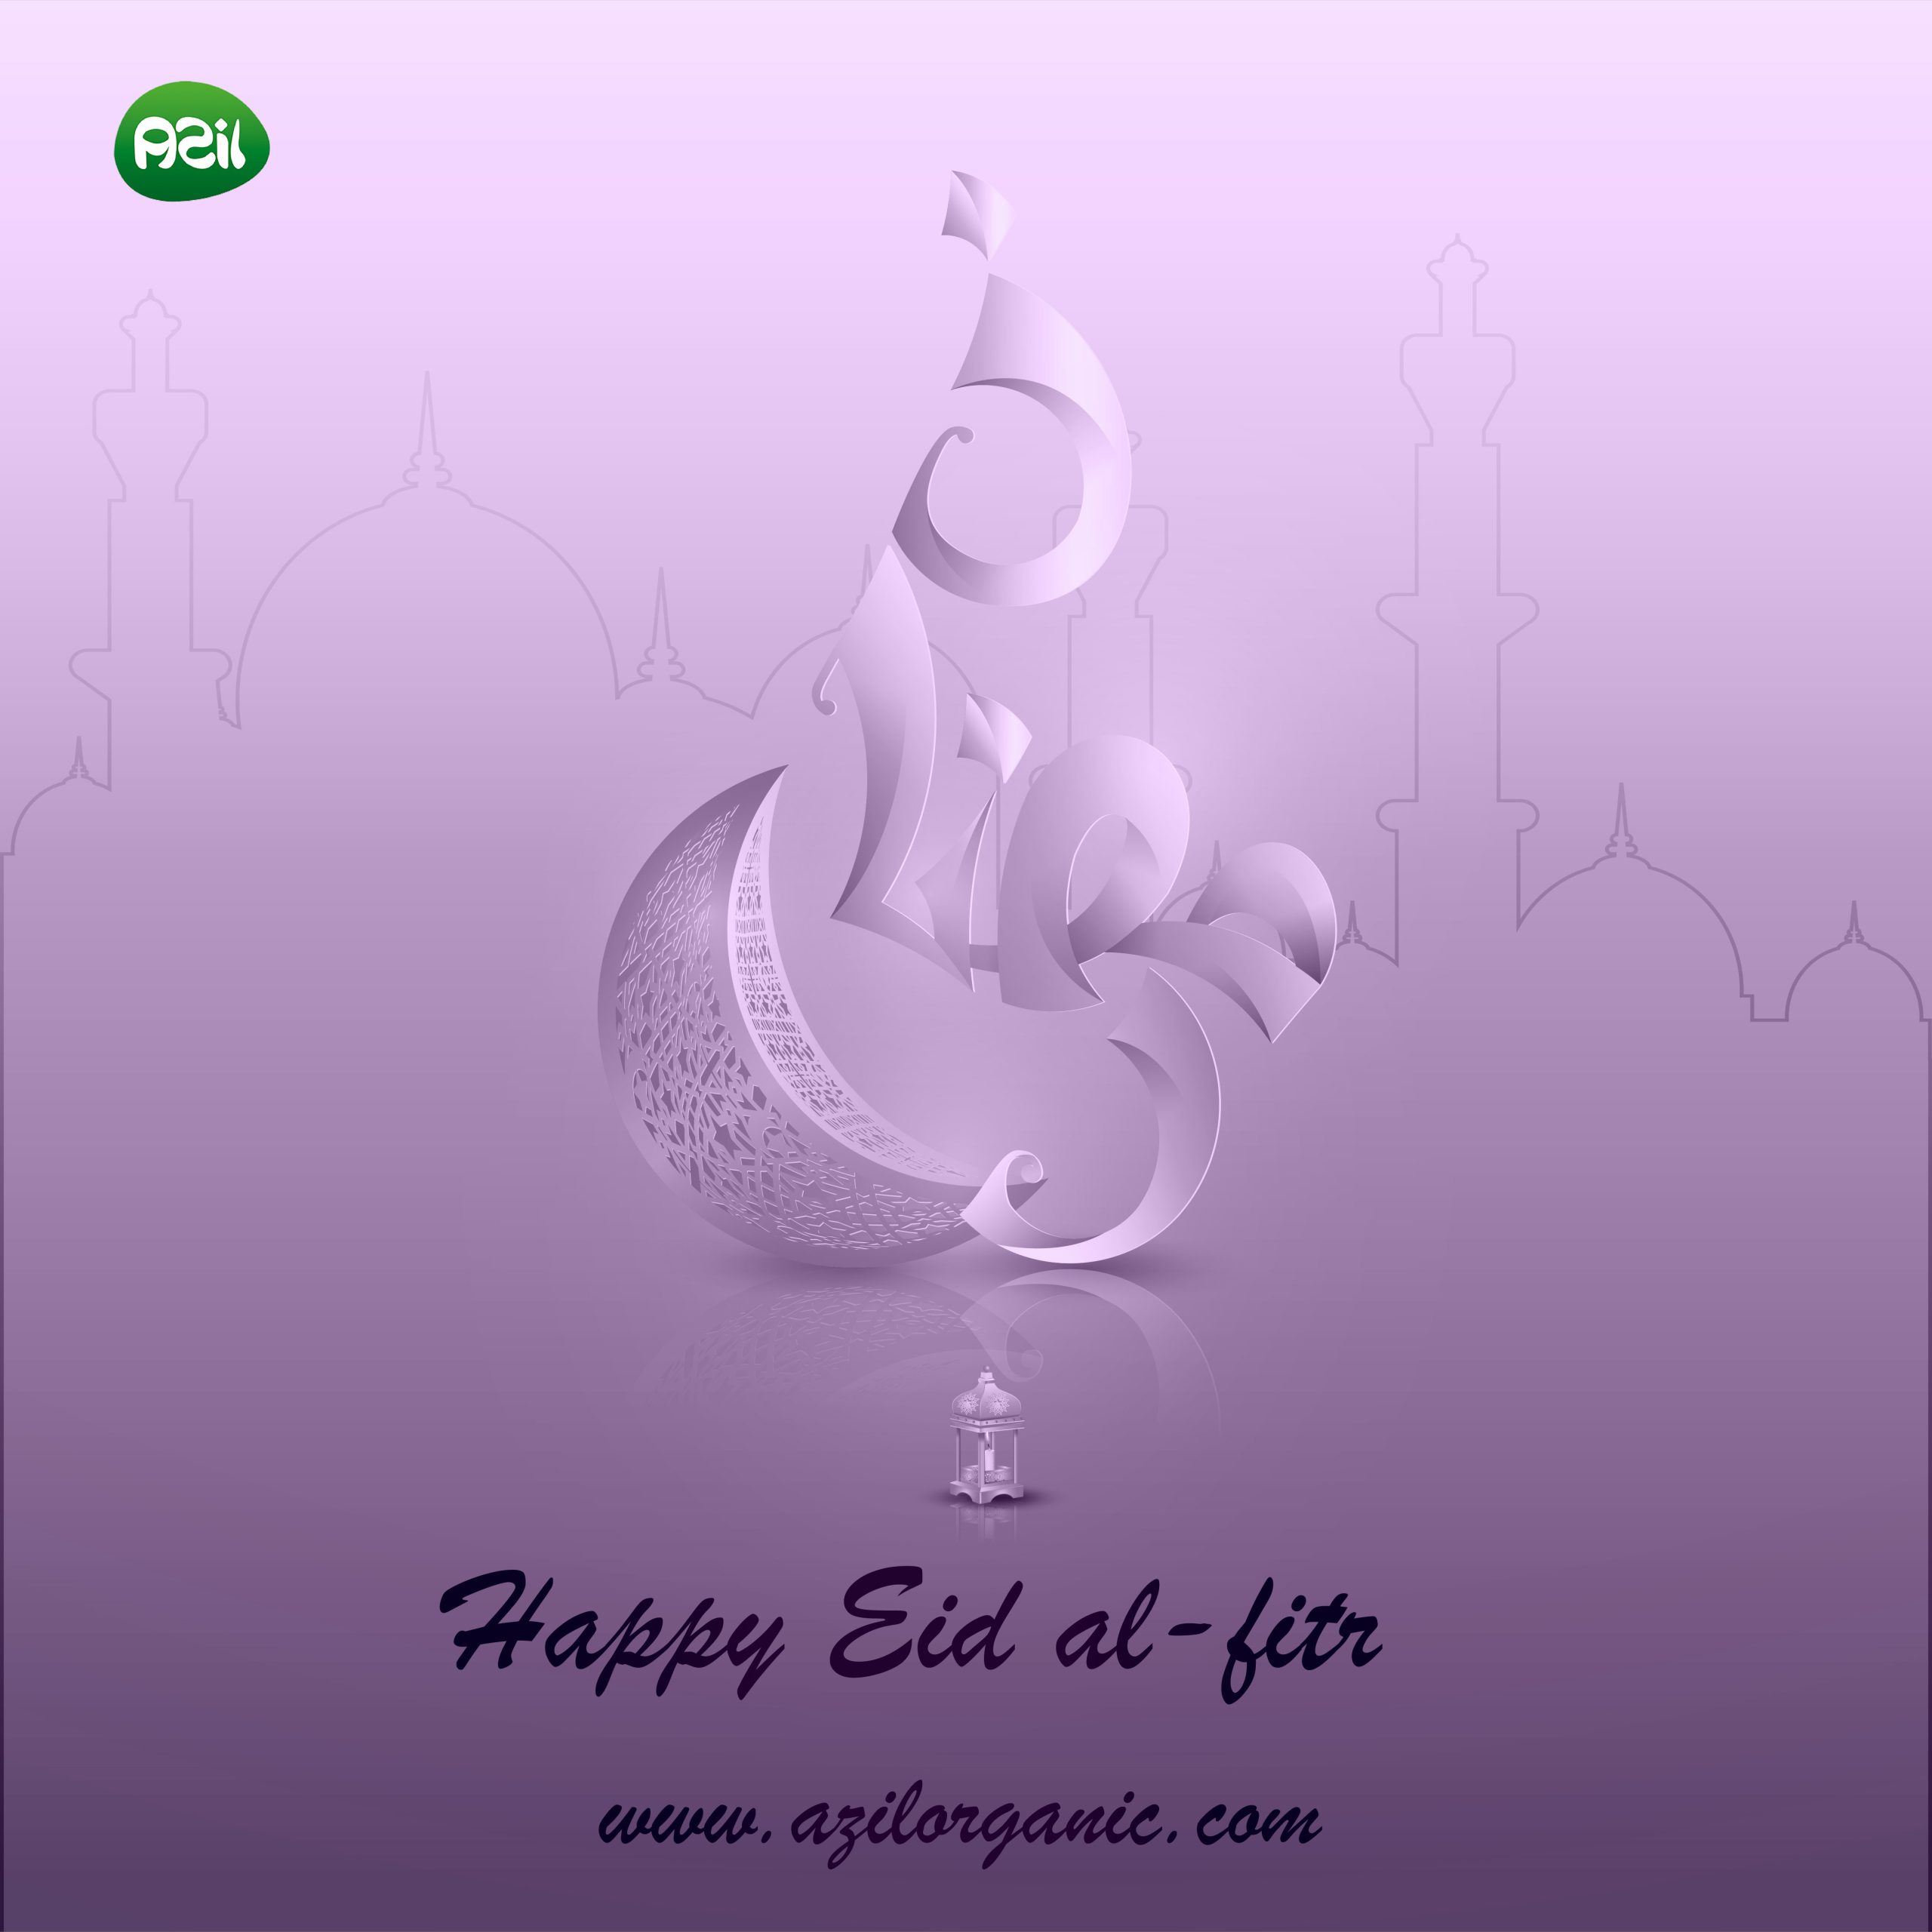 05 0۱ scaled - Greeting Eid al-Fitr to the Muslims of the world